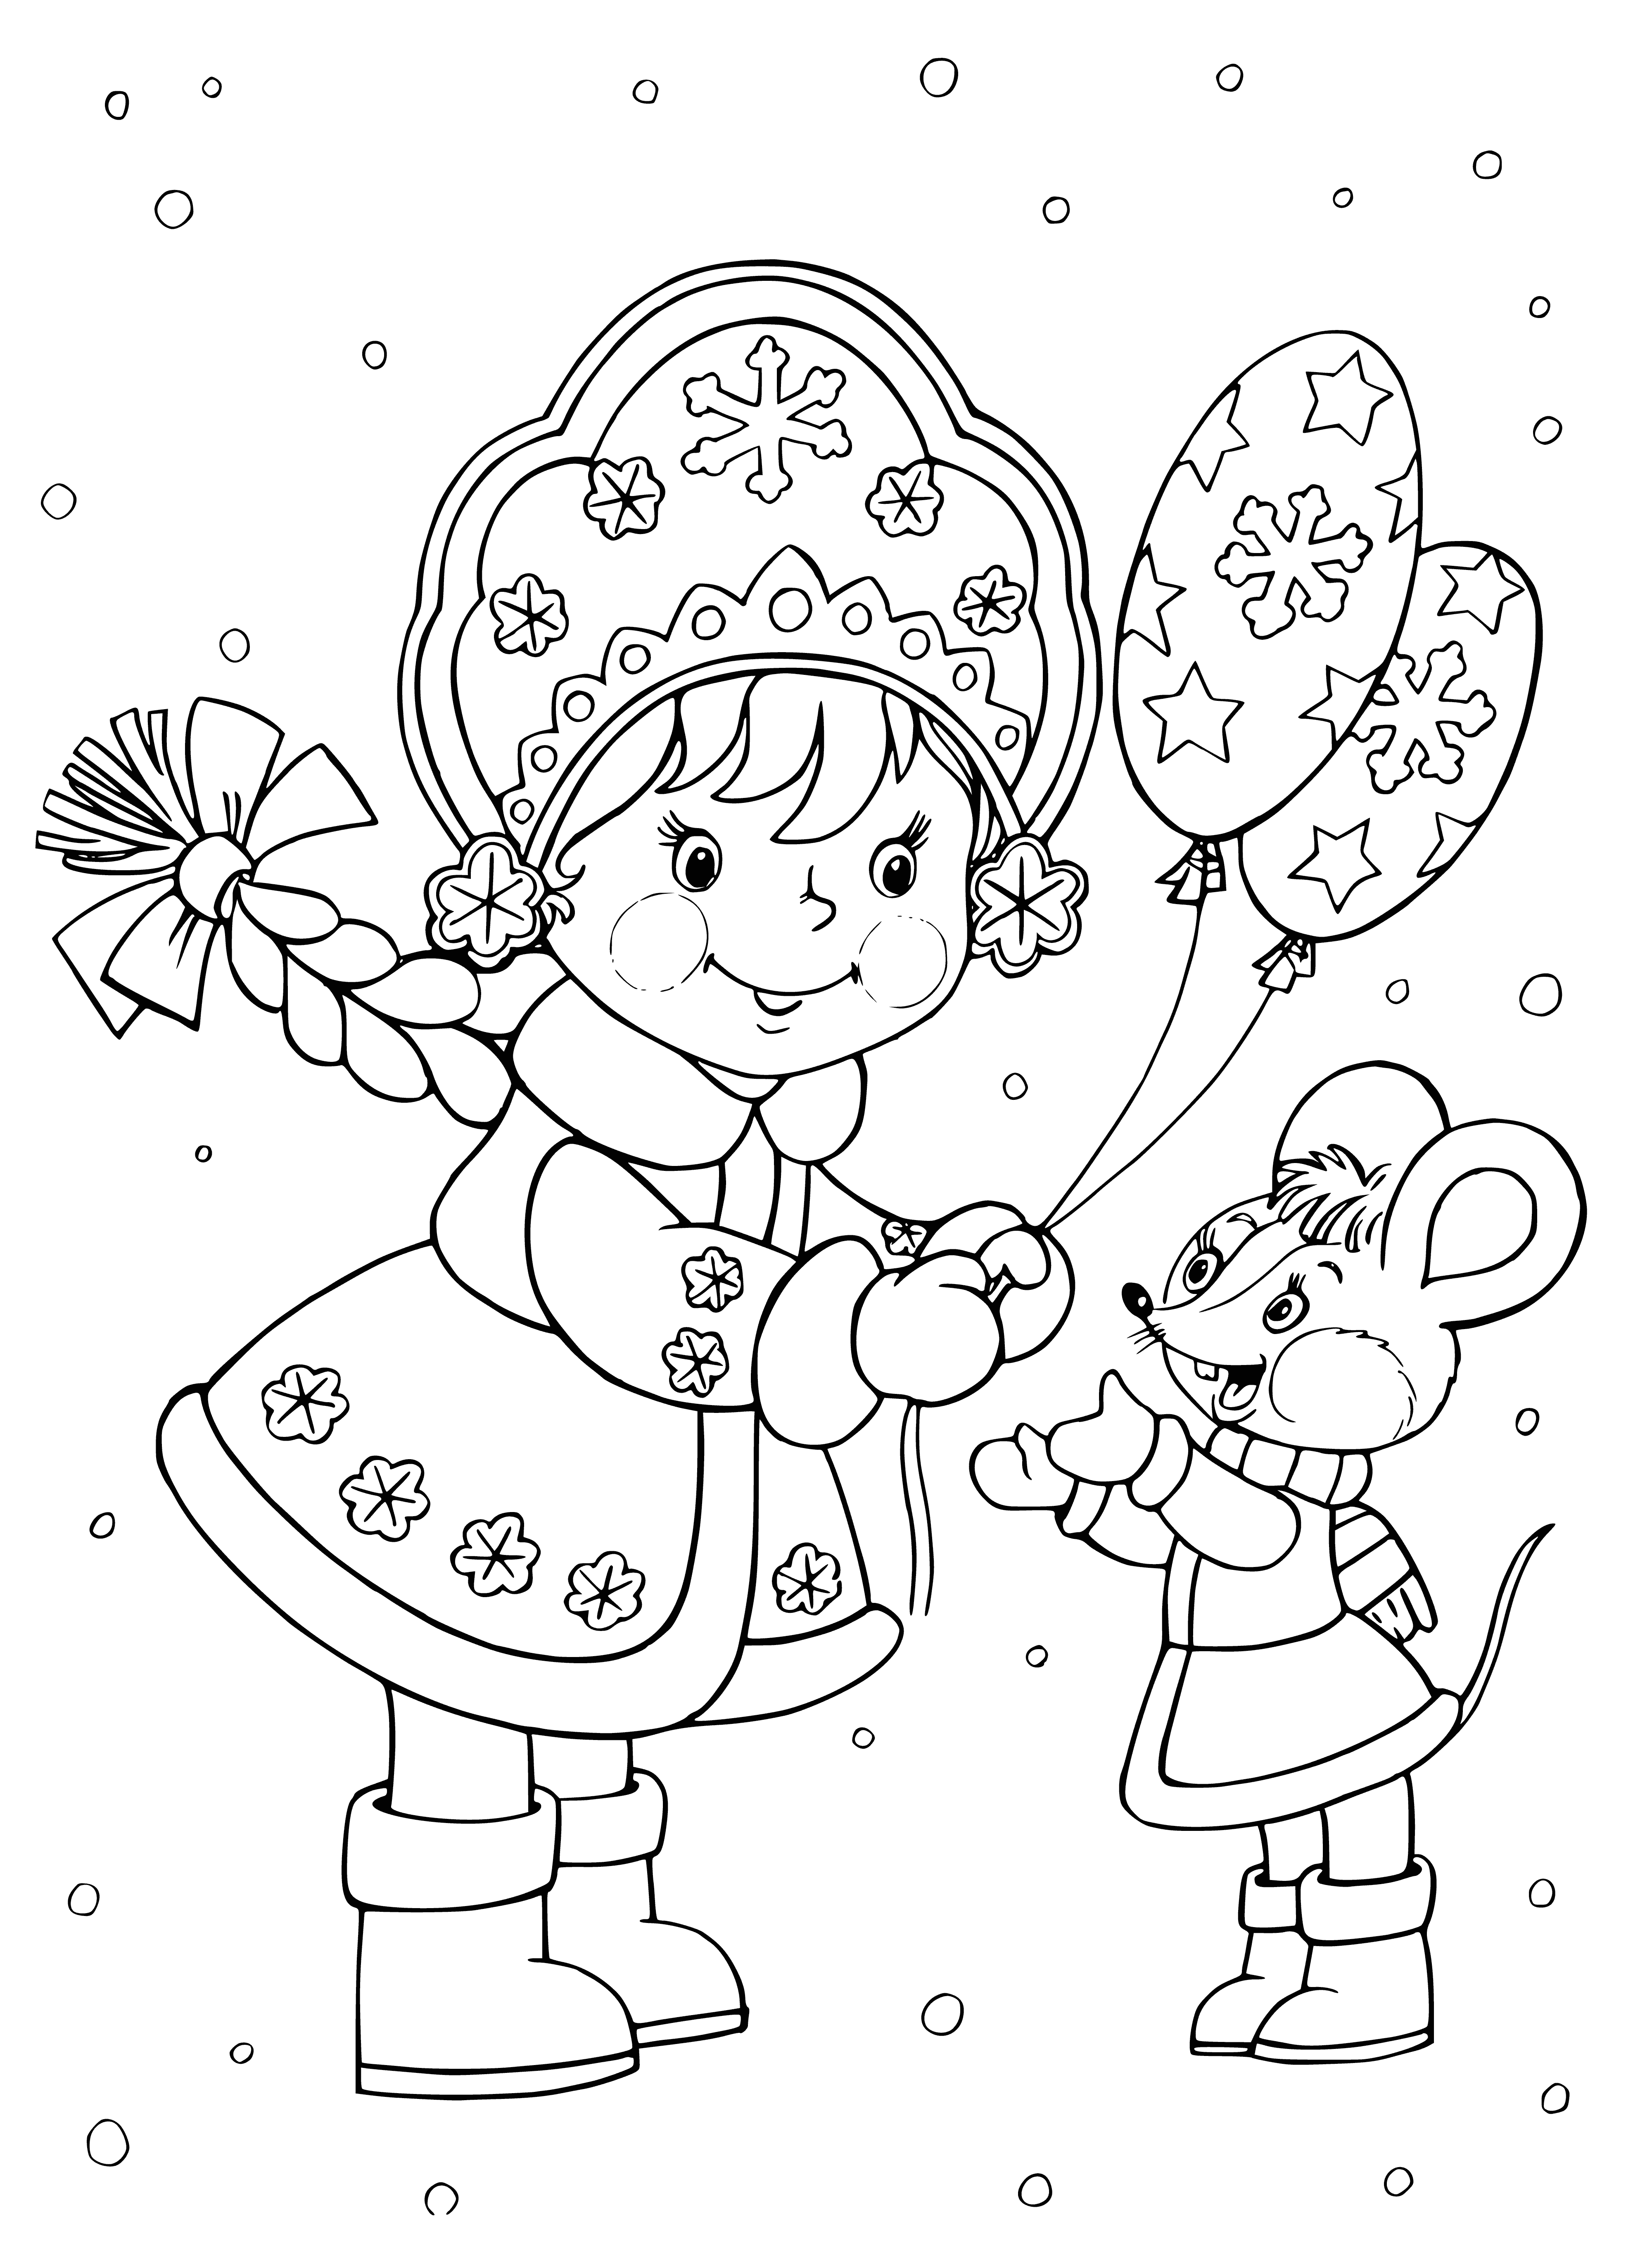 coloring page: Snow Maiden gives a white ball to a child, a special gift!